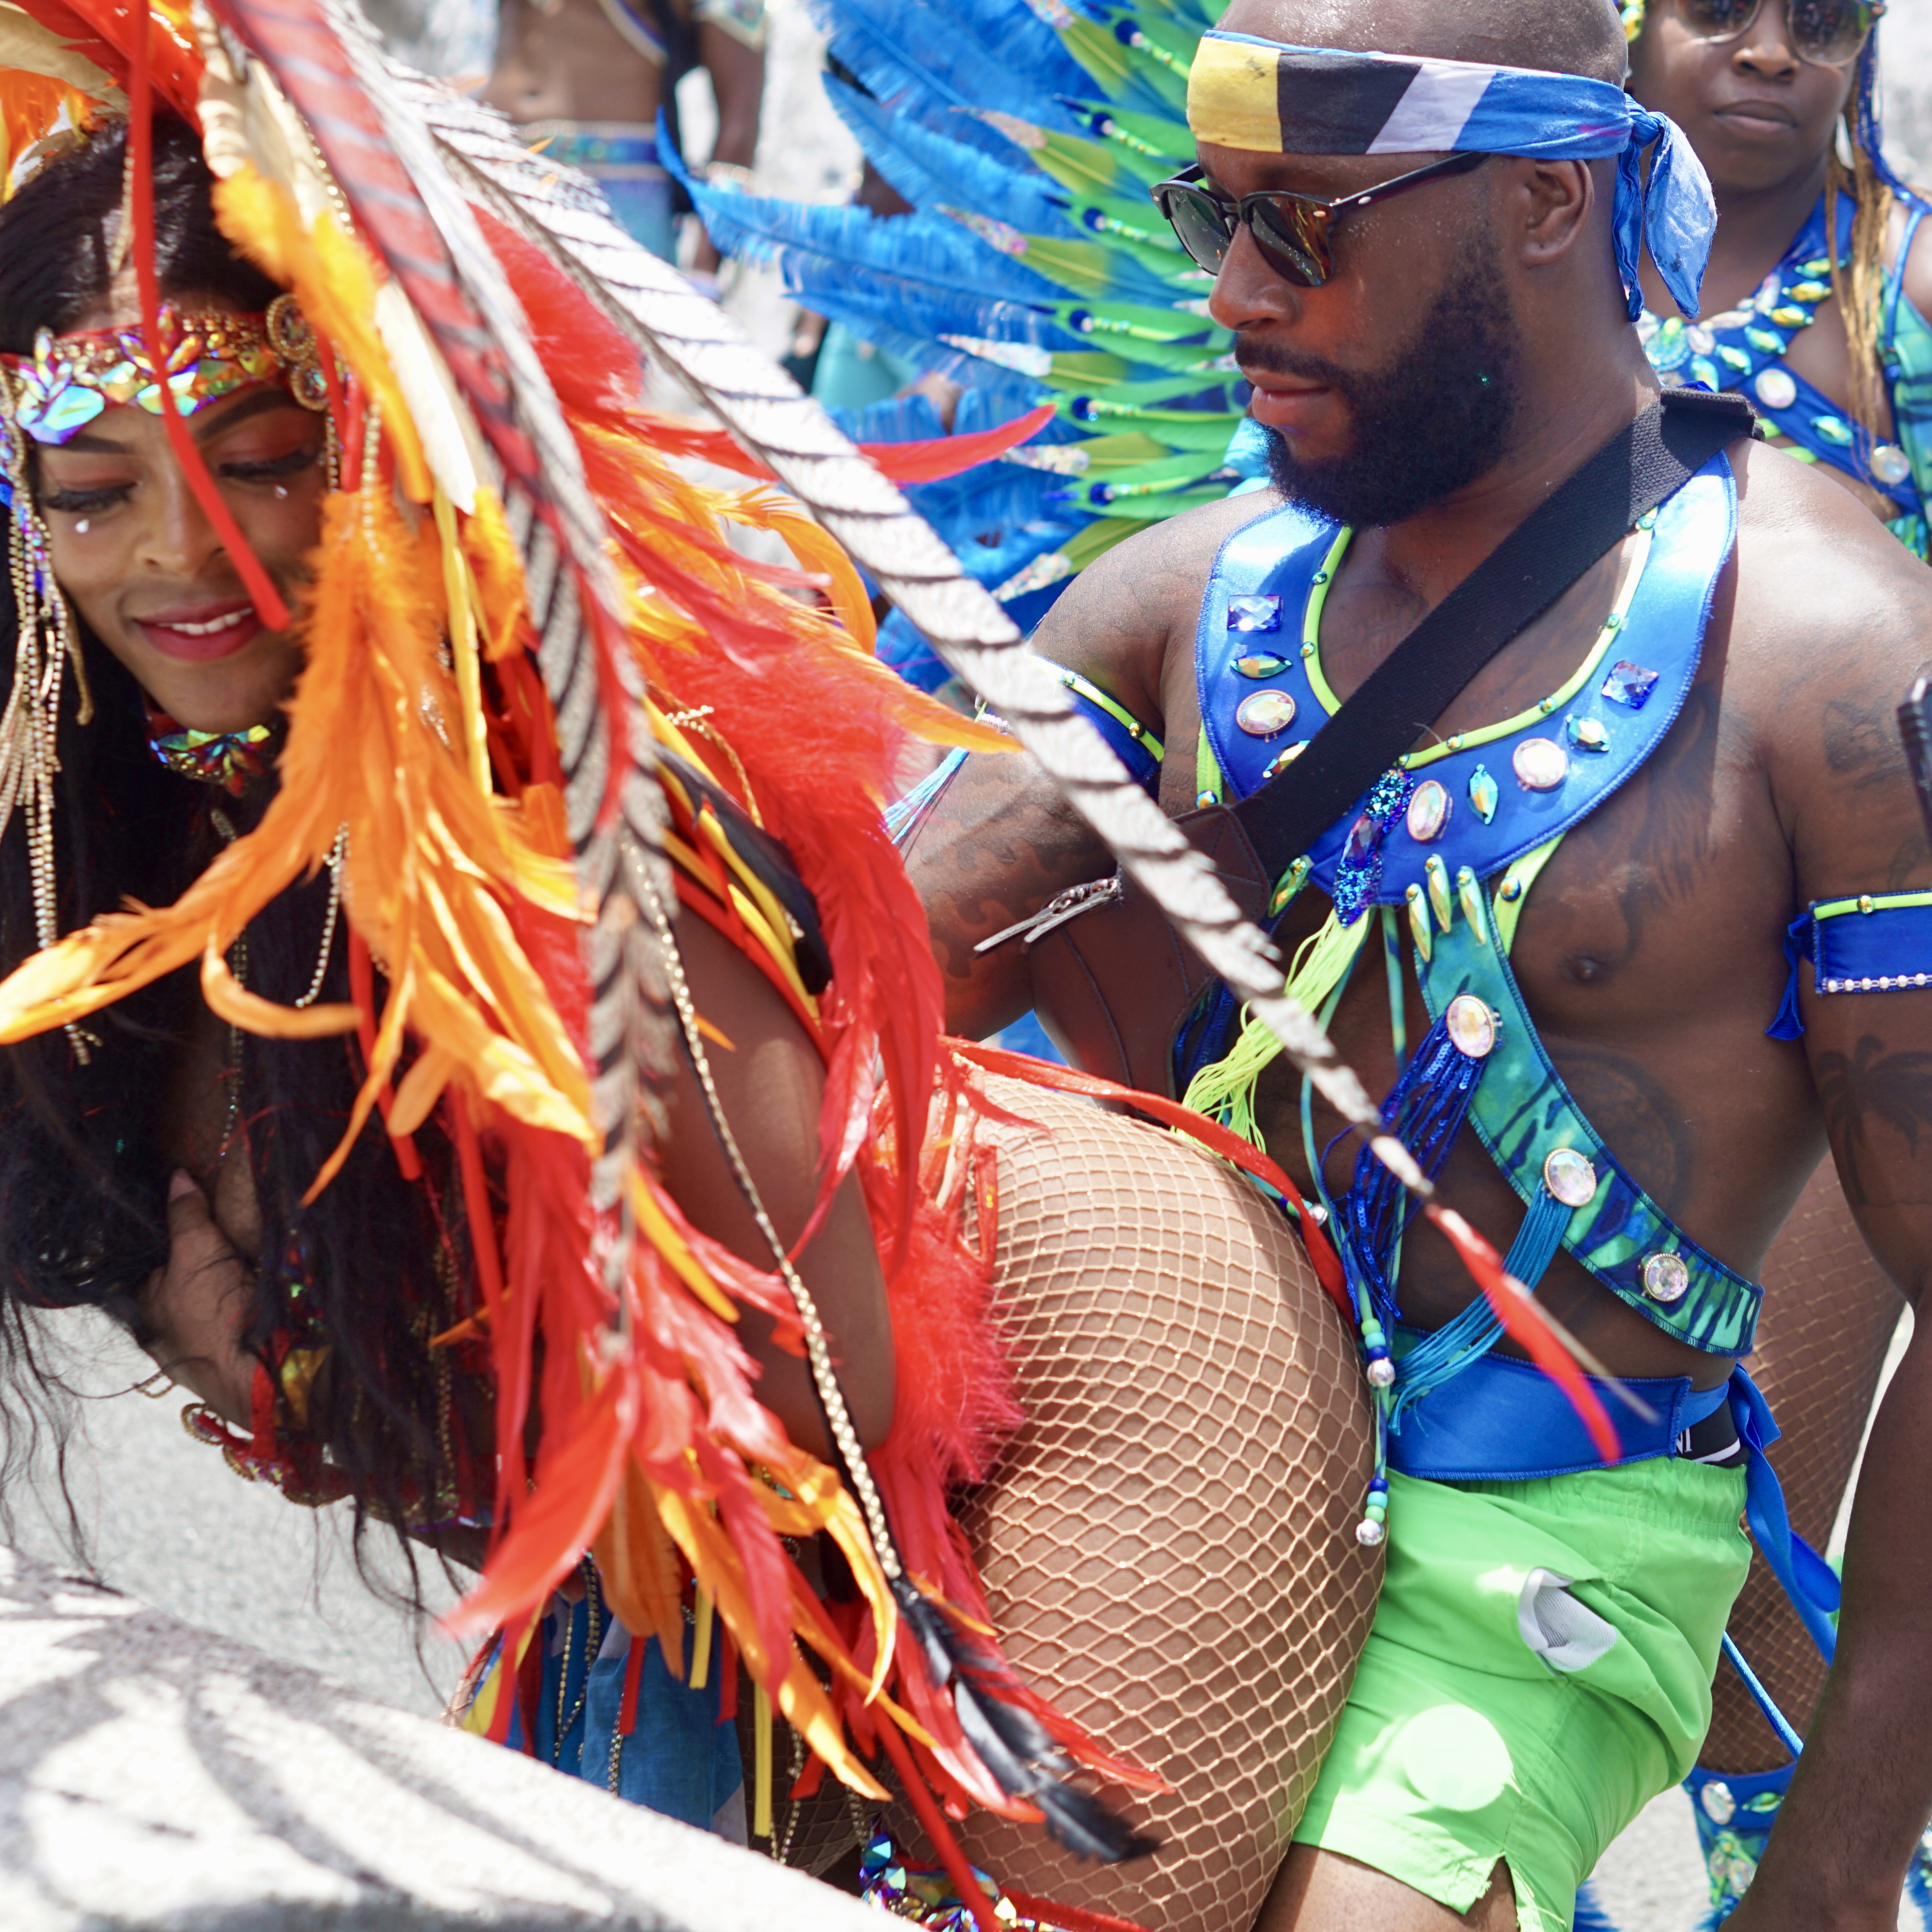 Man and woman decked out in their costumes dancing to soca